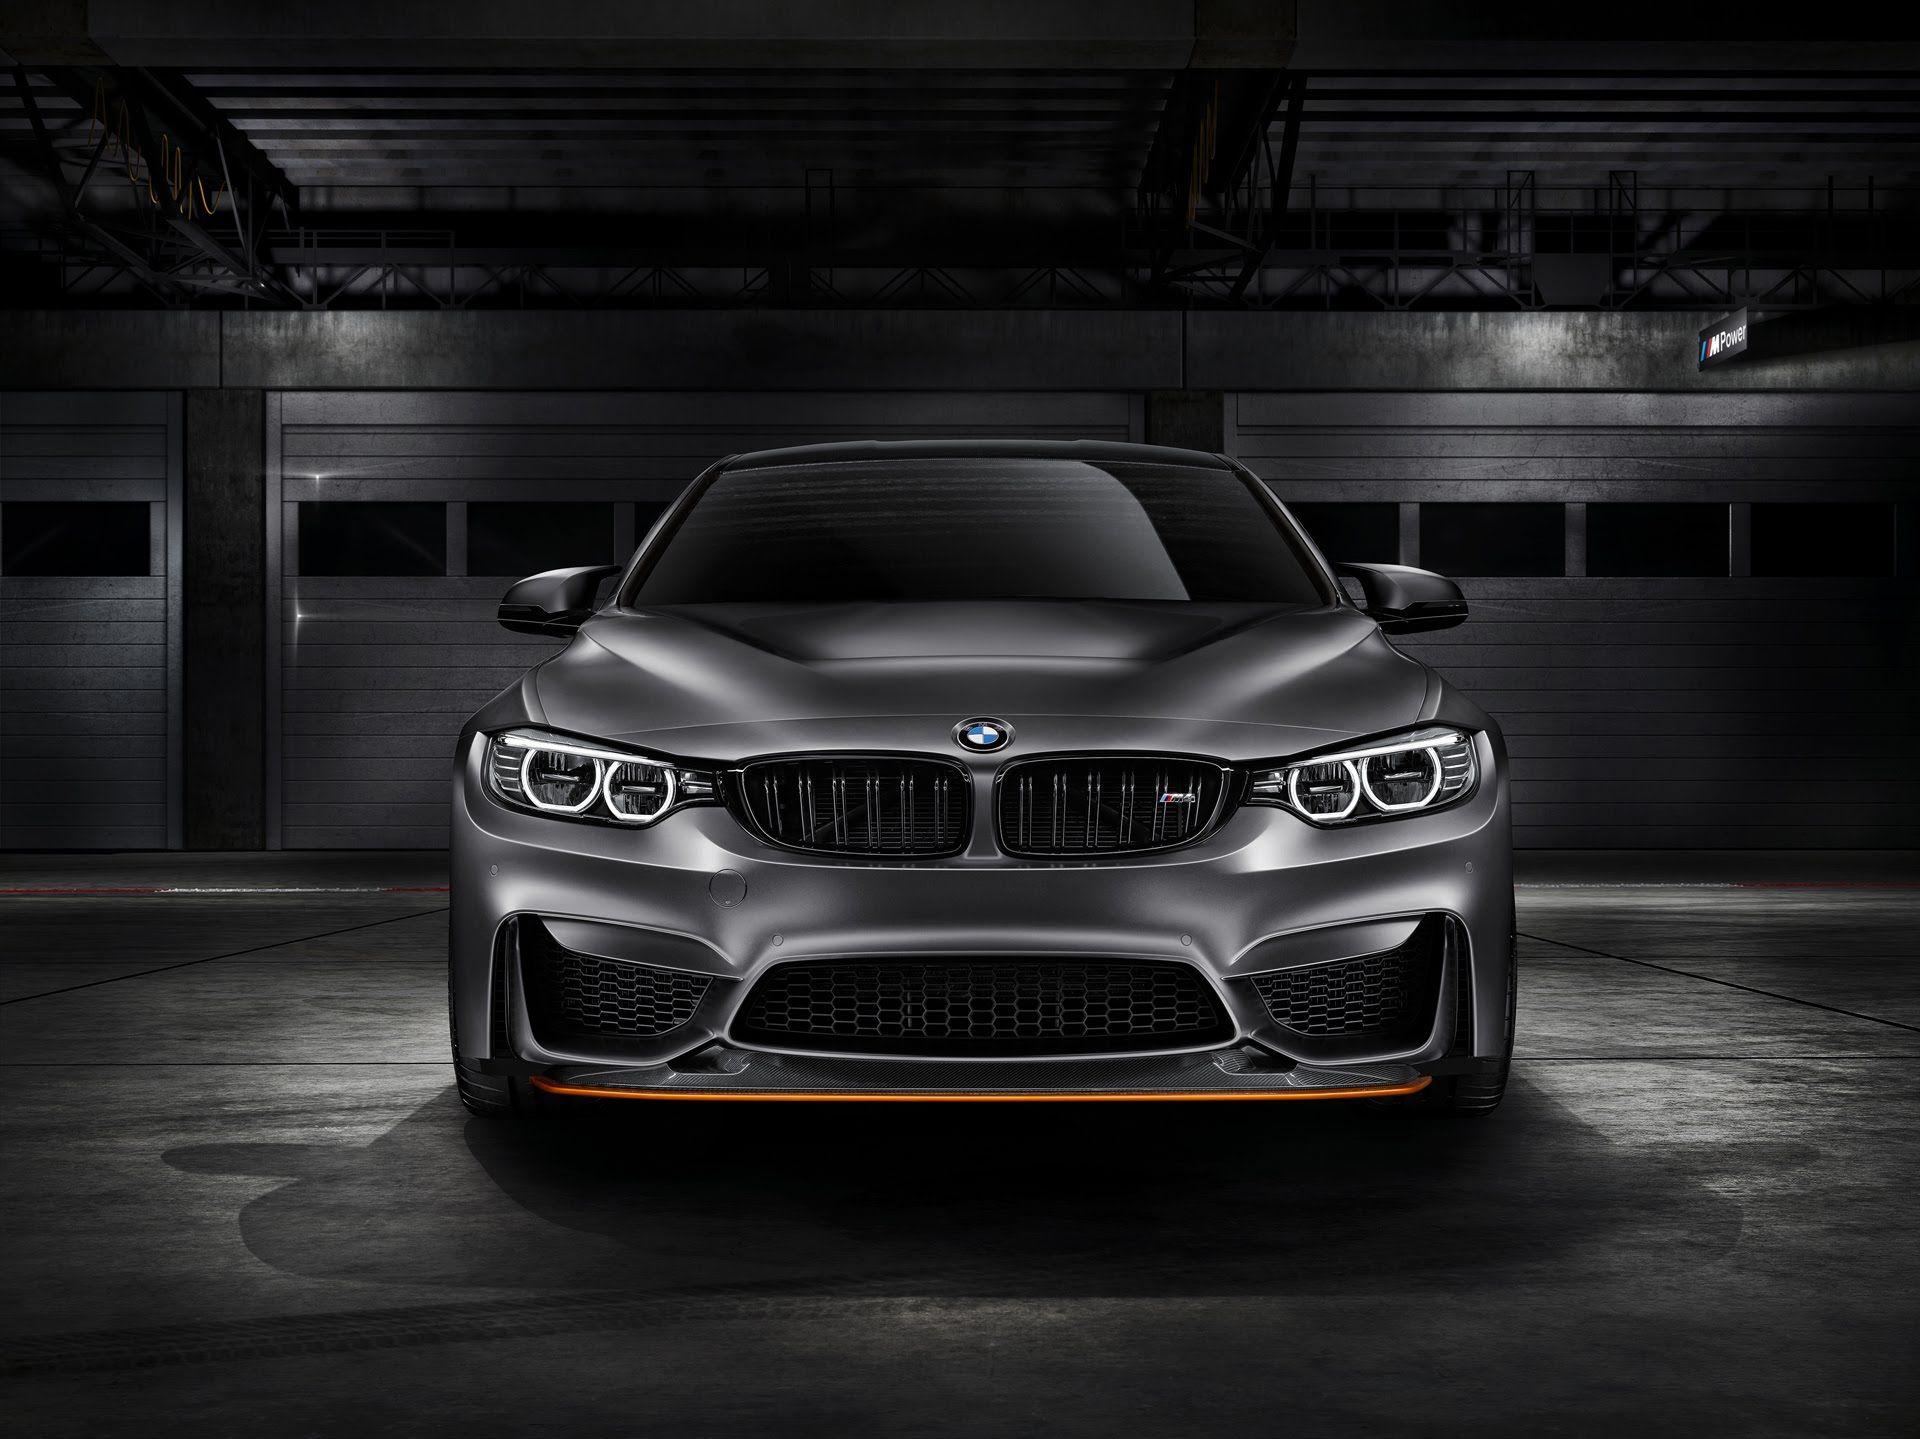 Bmw Wallpaper Android